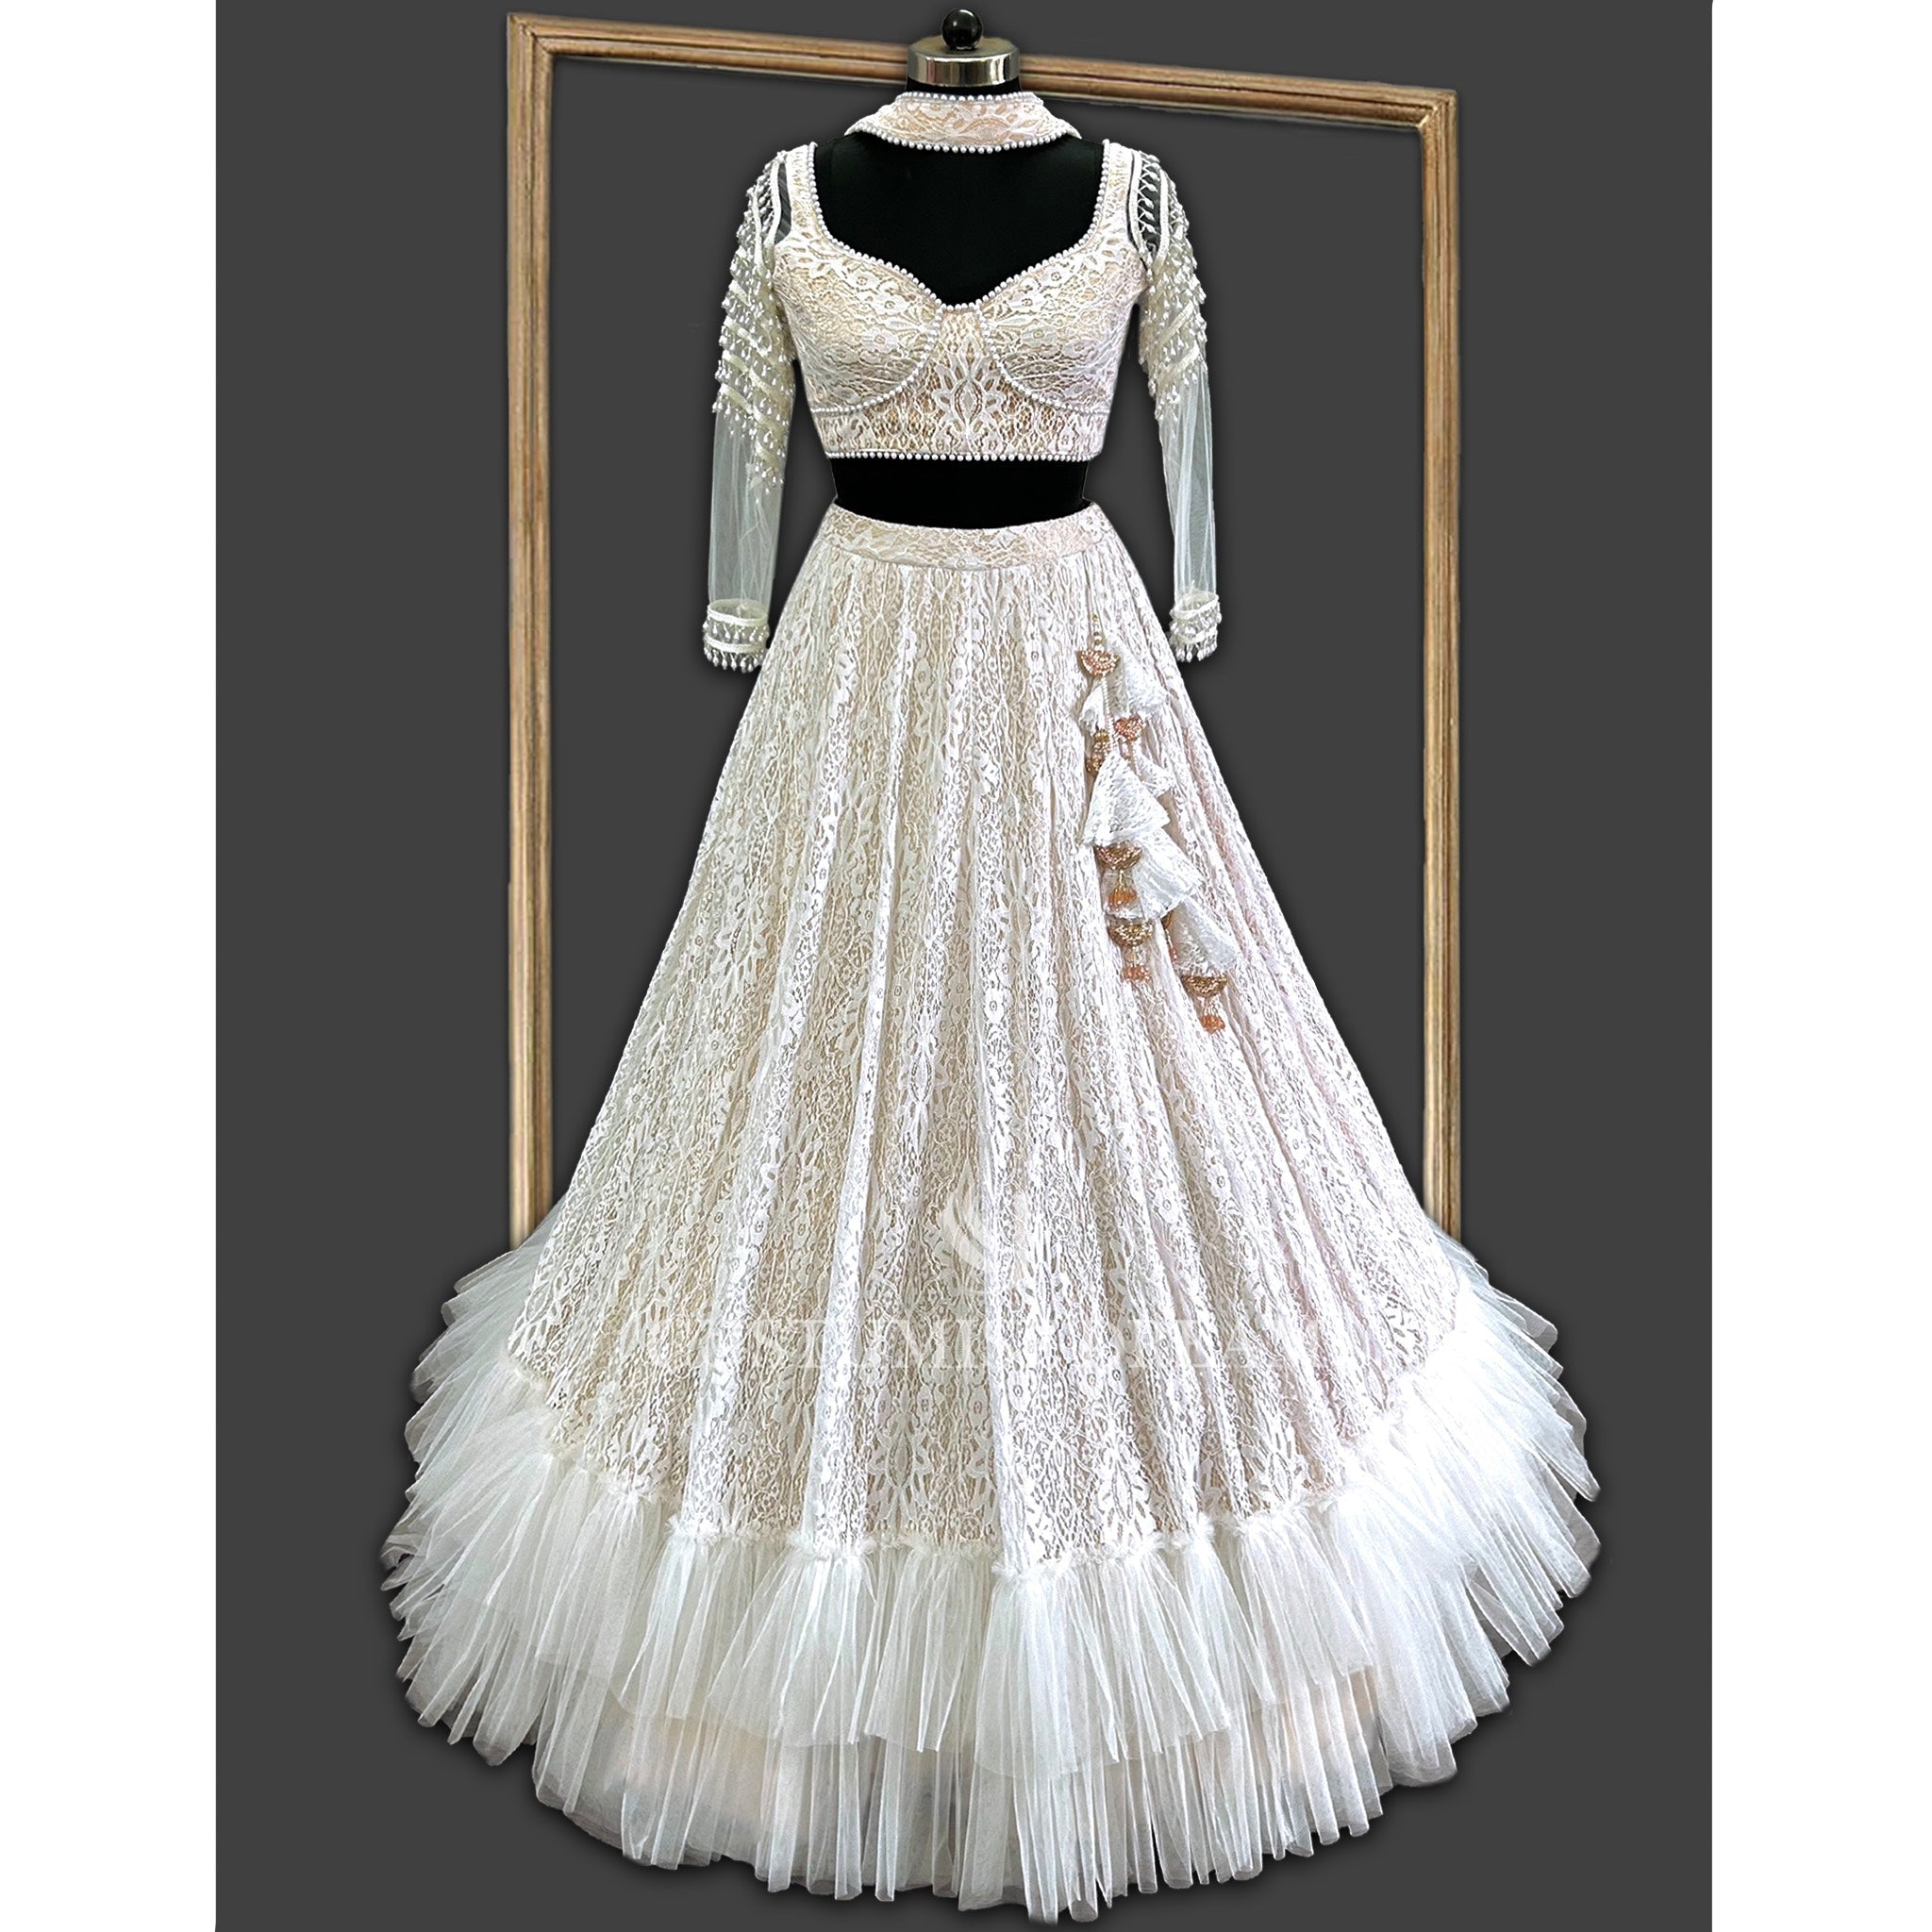 Pearl Lace Elegance: White Lehenga with Layered Frills and Nude Lining - Indian Designer Bridal Wedding Outfit